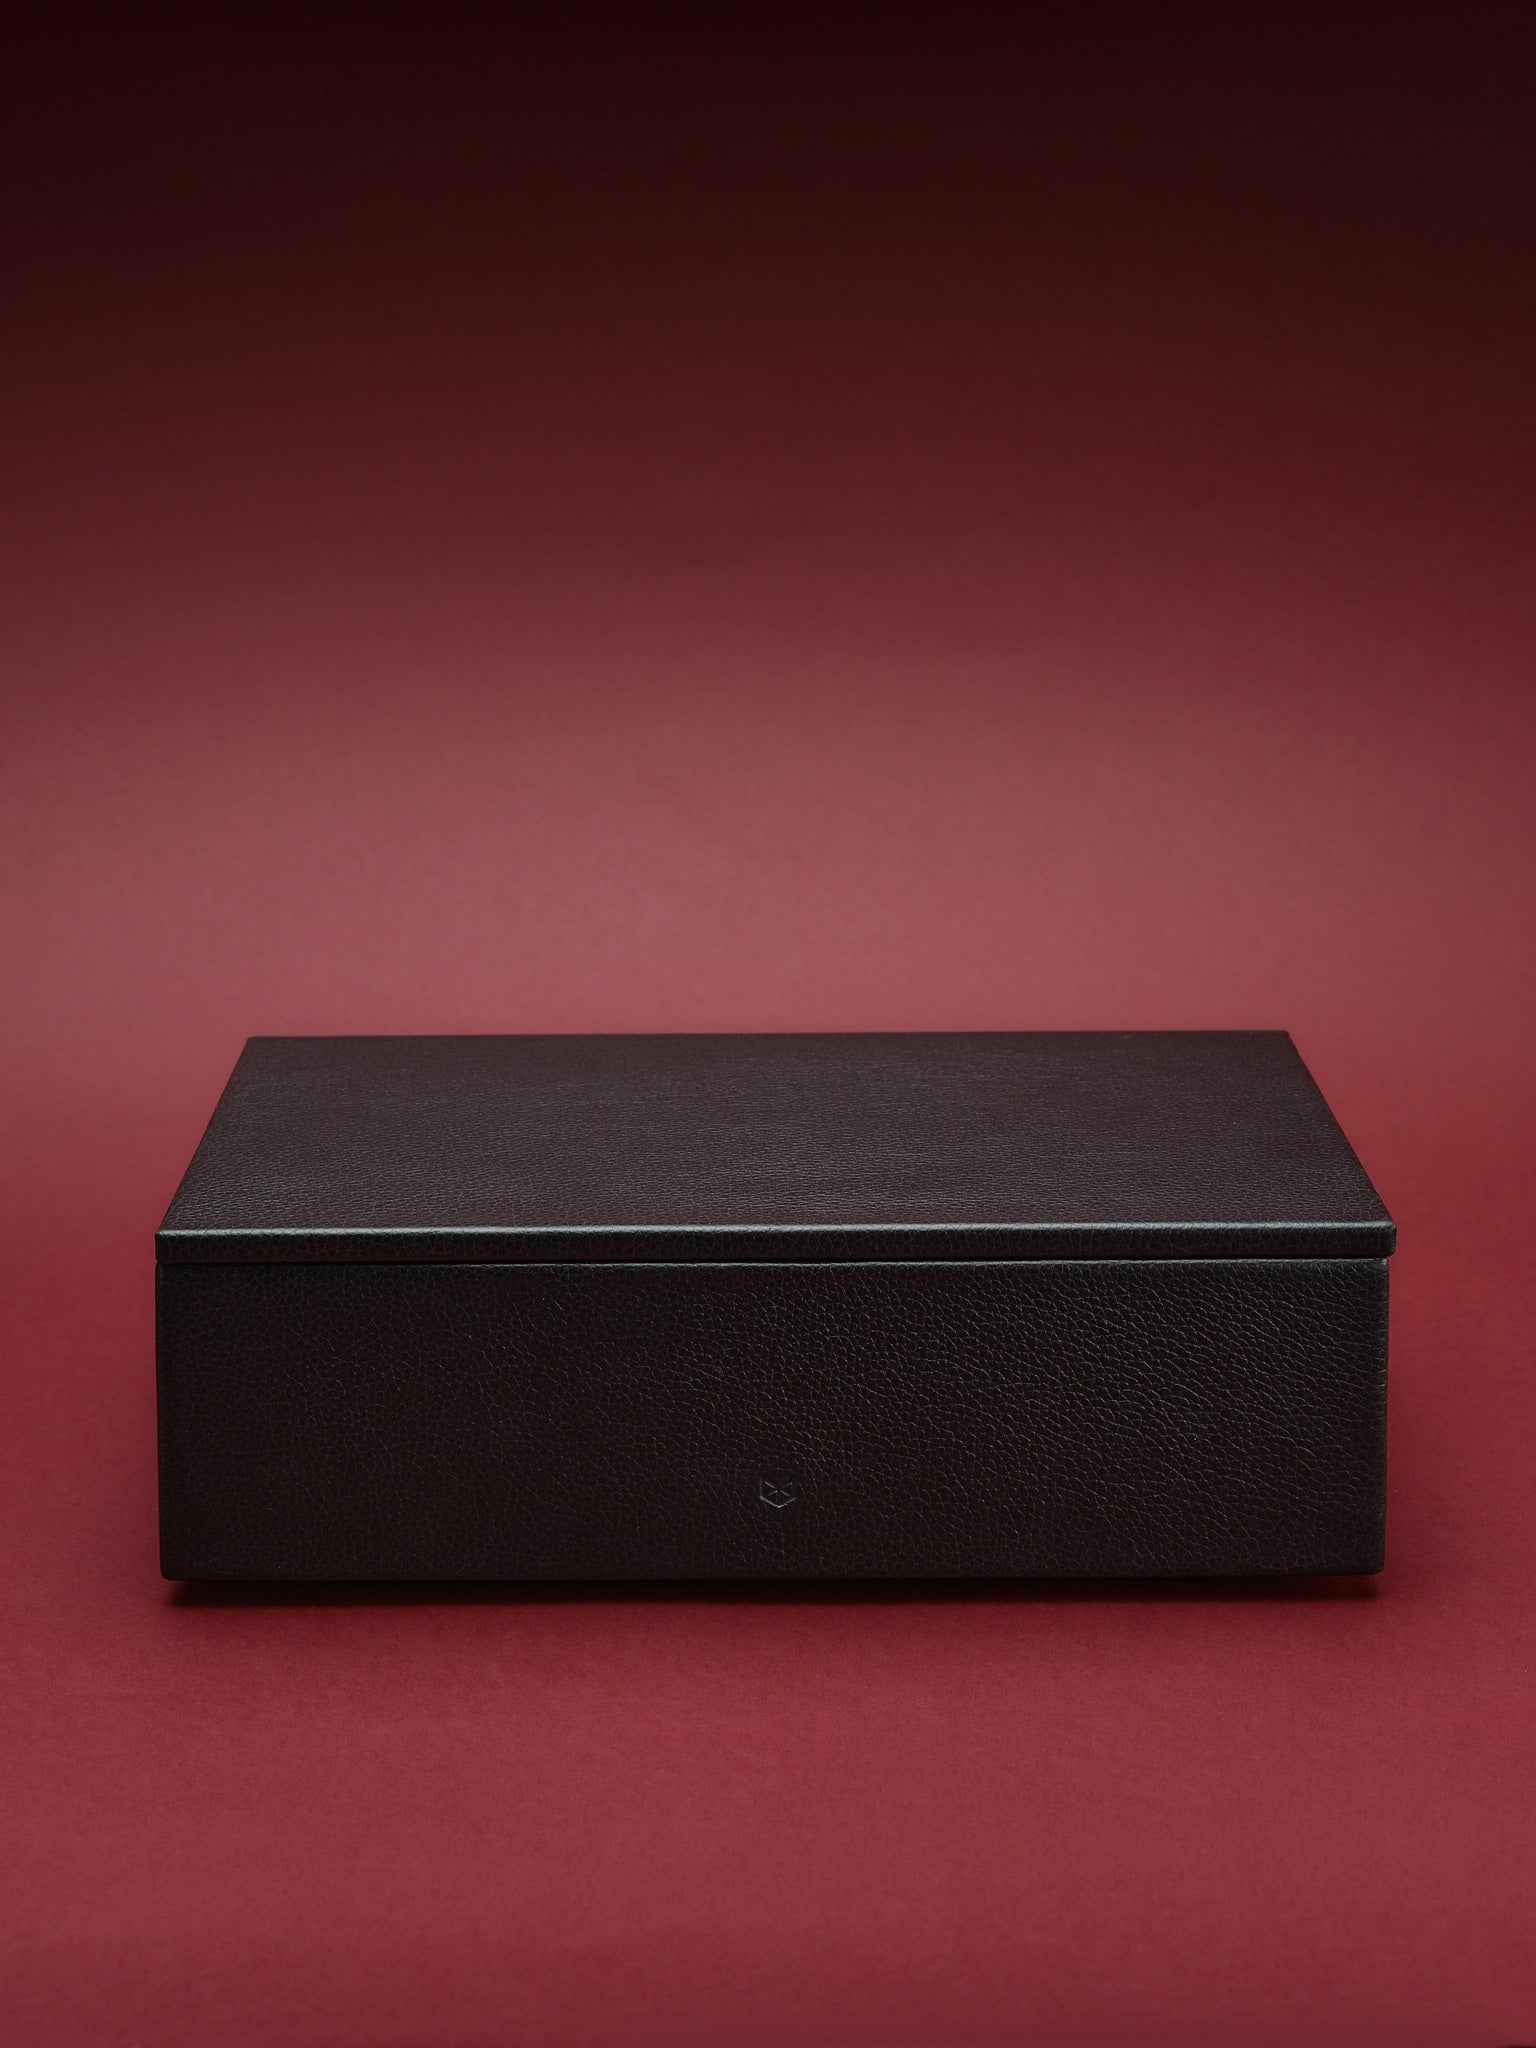 Hard Watch Case. Box for Watches Black by Capra Leather